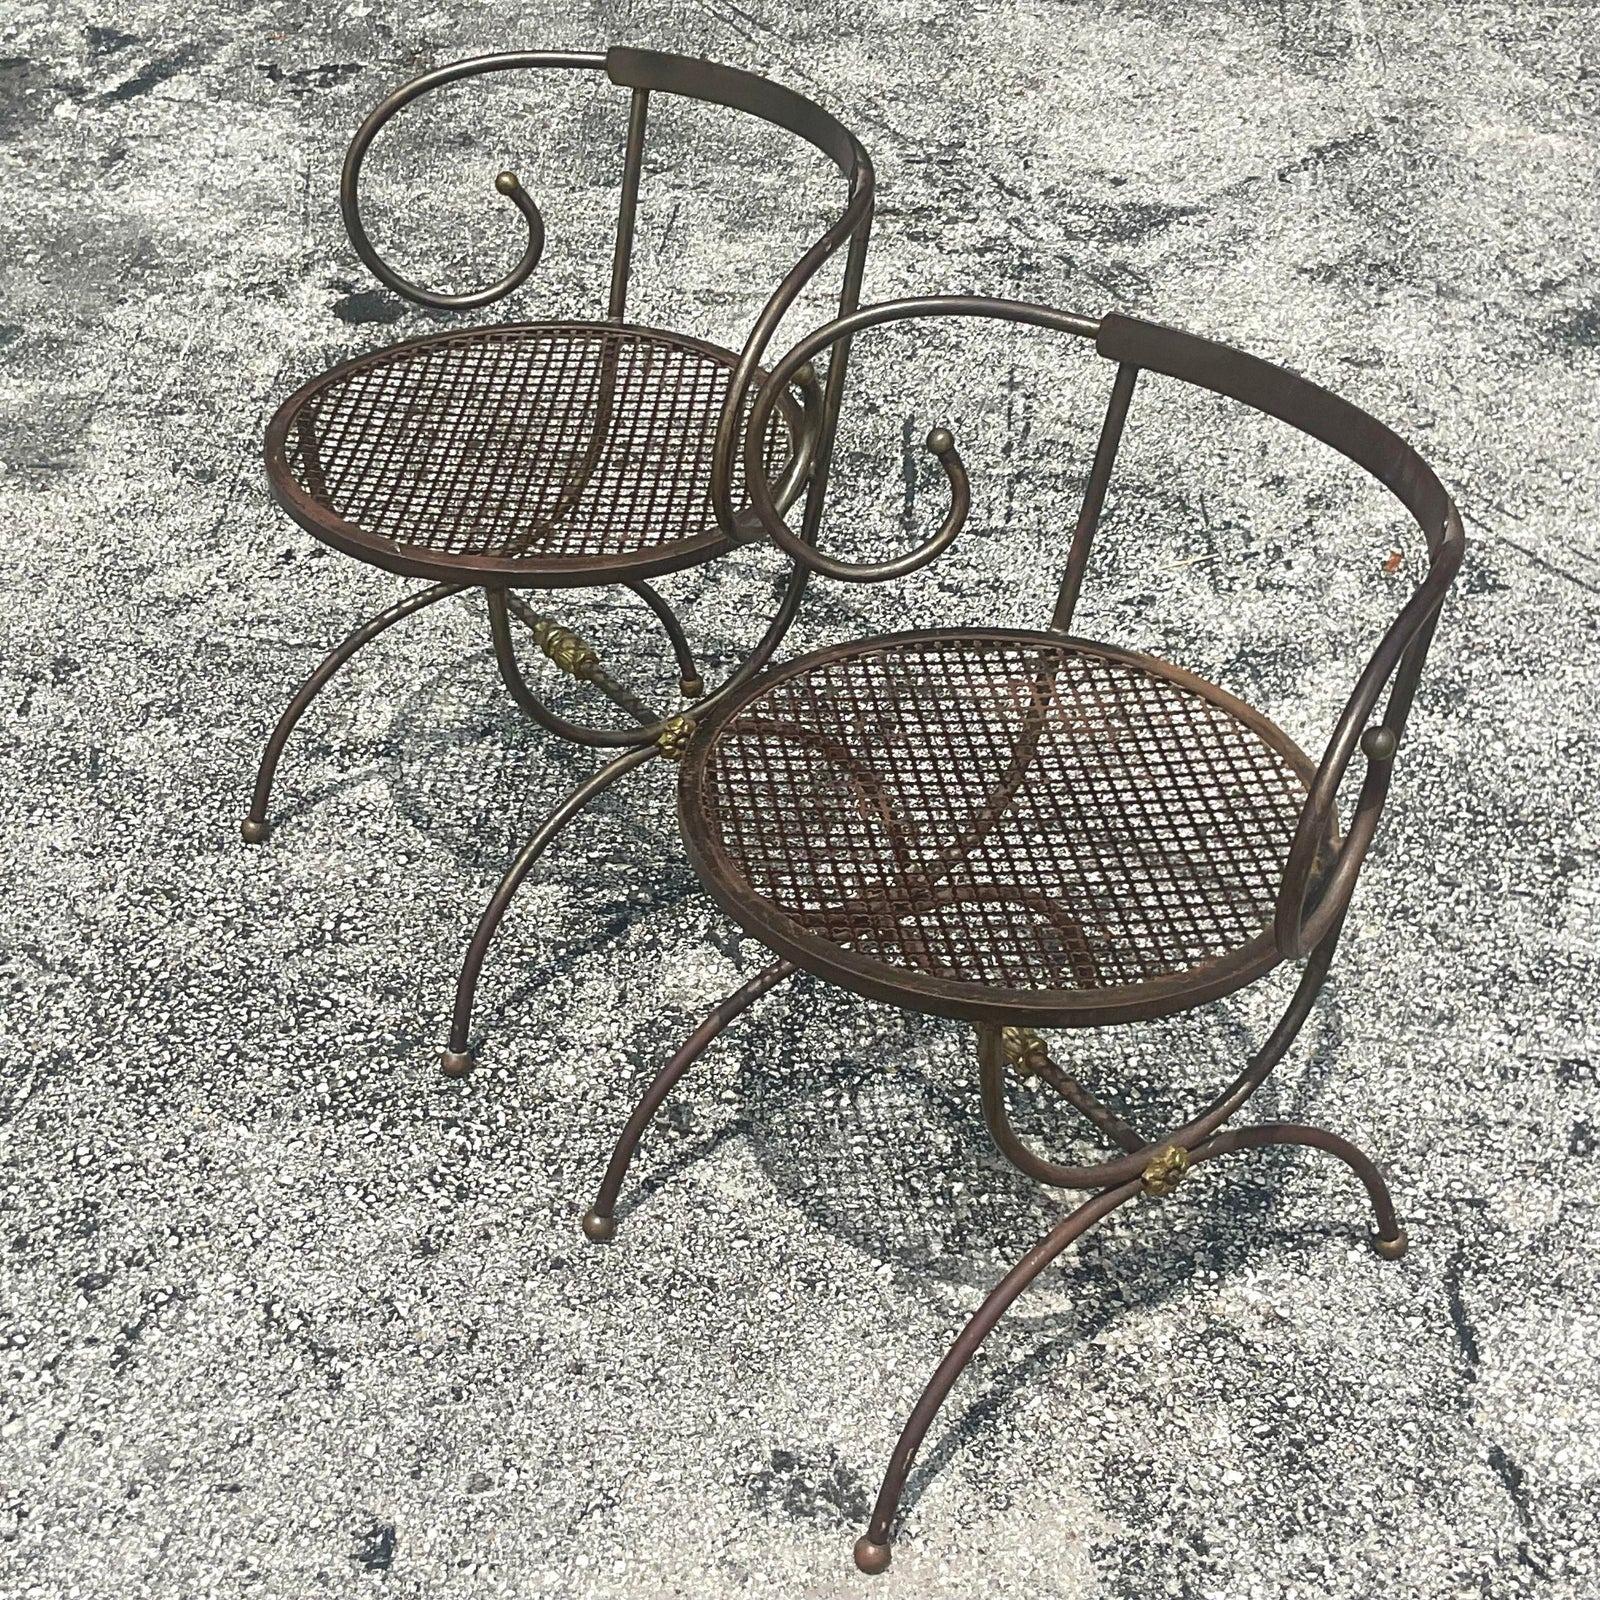 Vintage Boho Swirl Wrought Iron Accent Chairs - a Pair For Sale 4